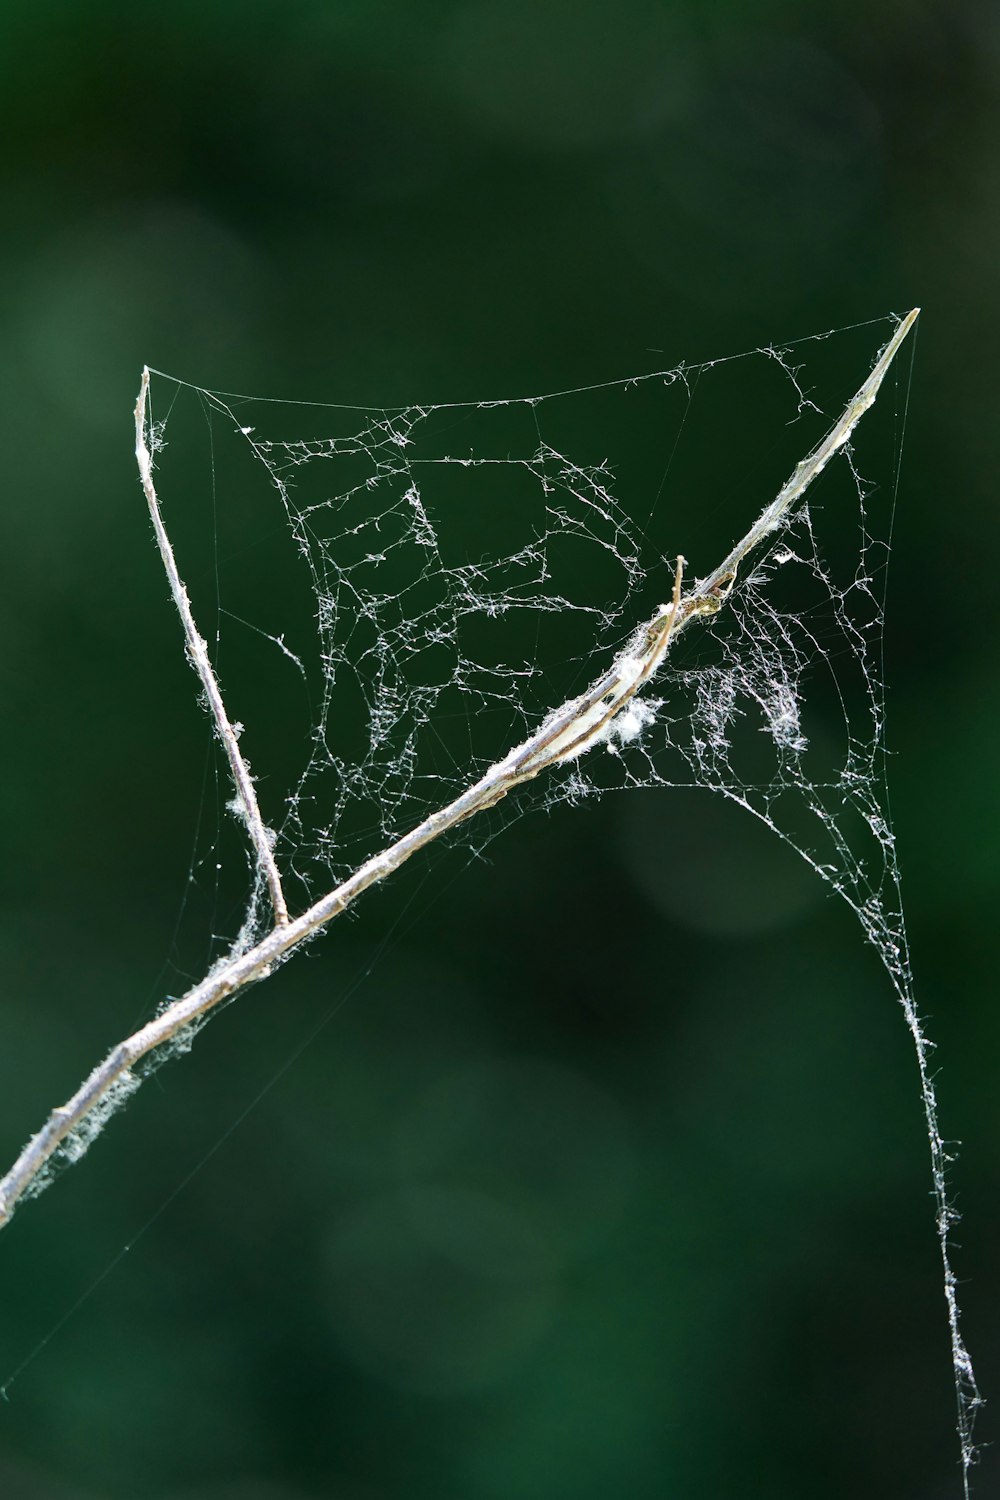 a close up of a spider web on a tree branch